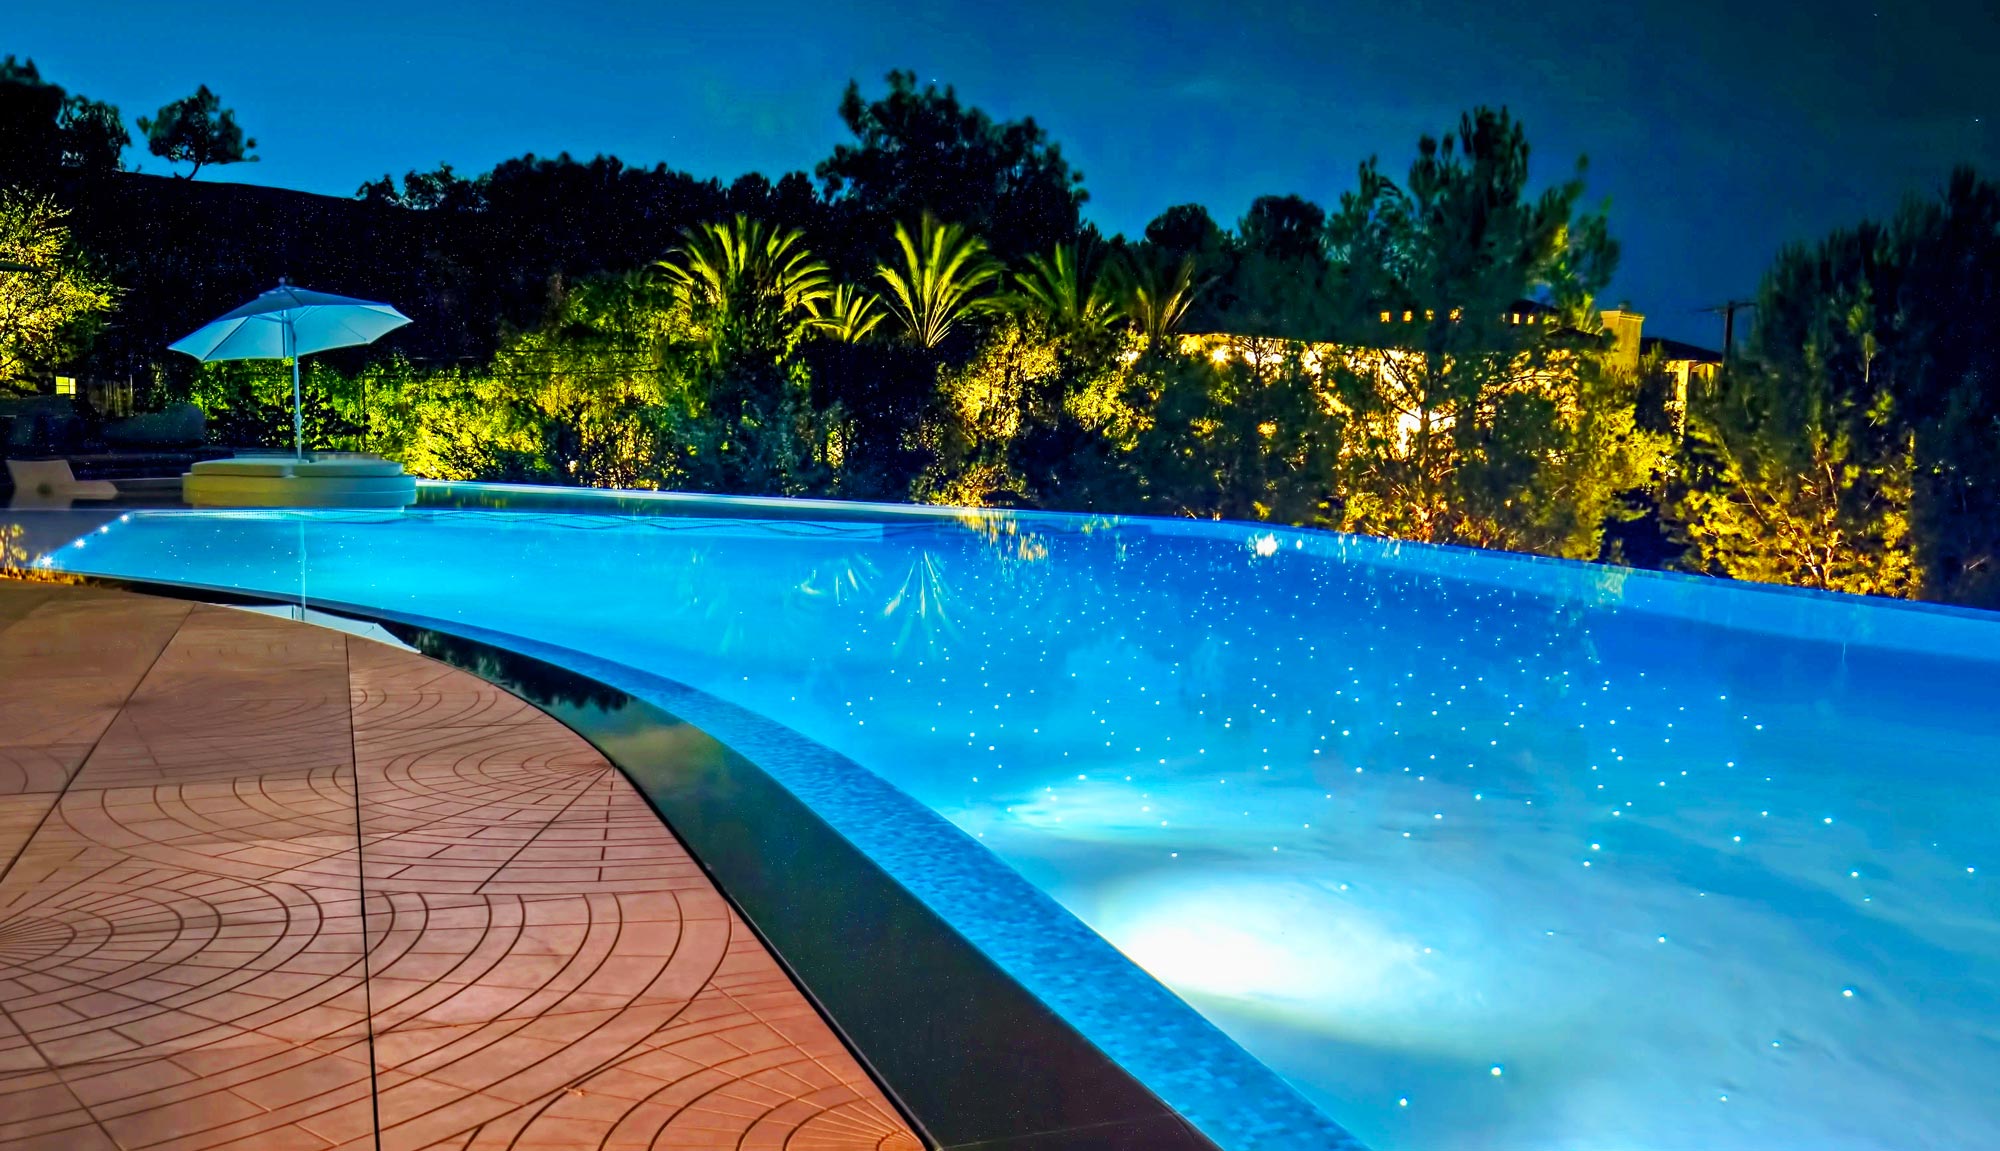 Pool at night with interiors lights